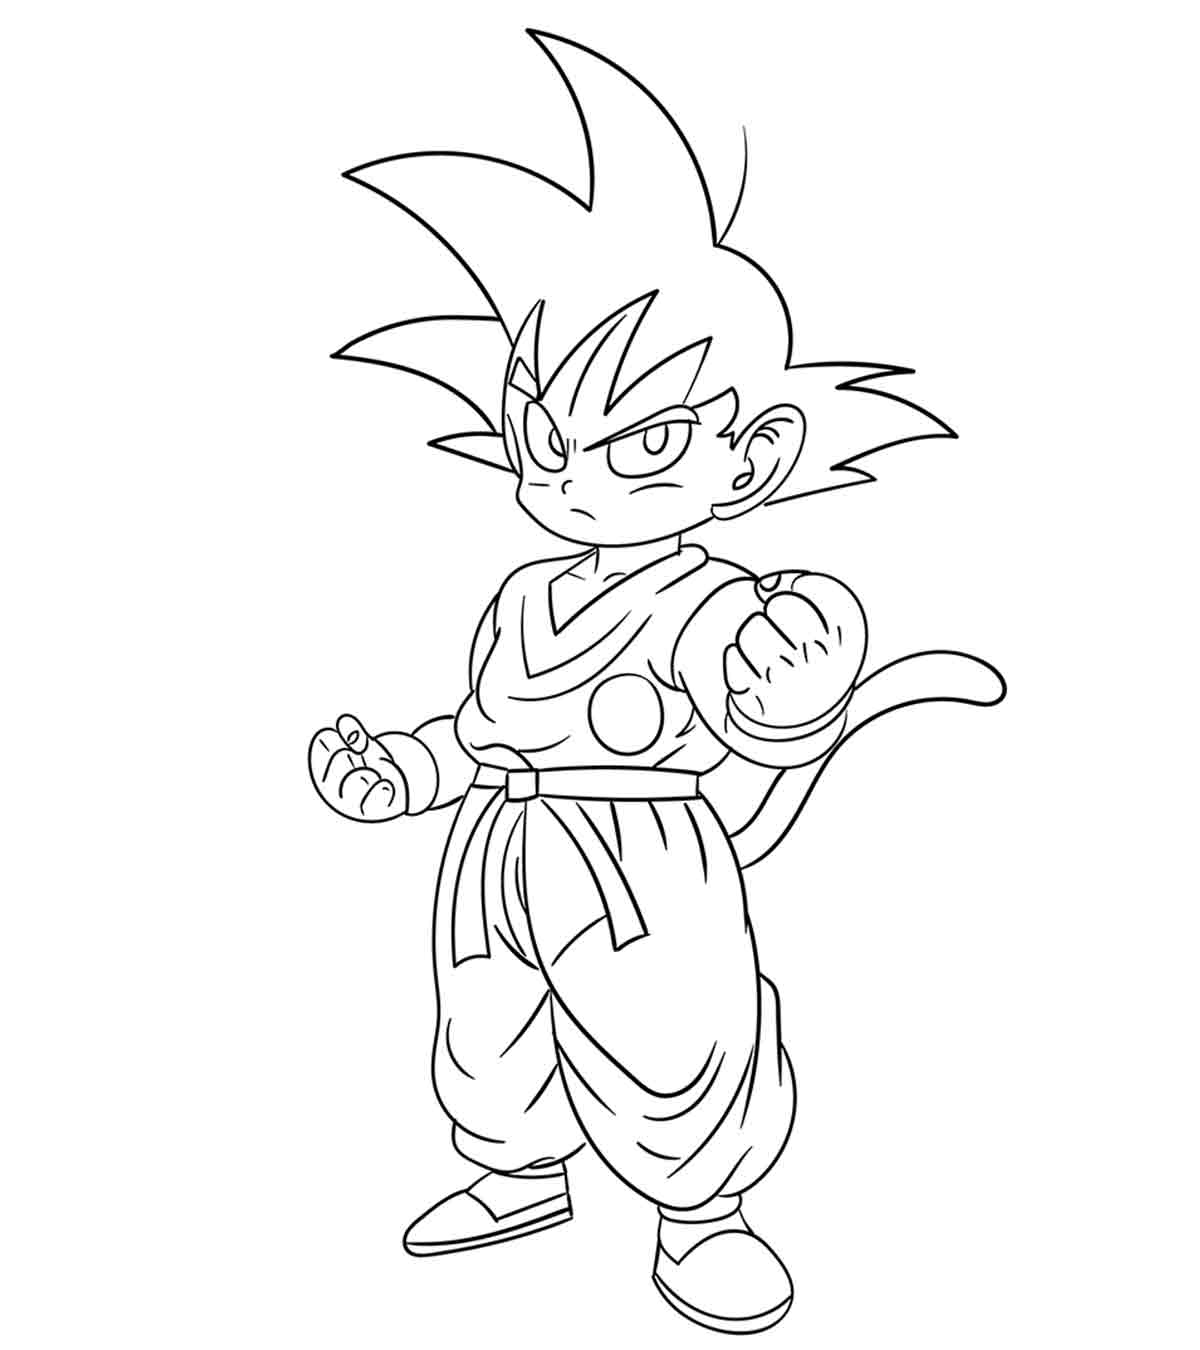 Top 20 Dragon Ball Z Coloring Pages Your Toddler Will Love_image